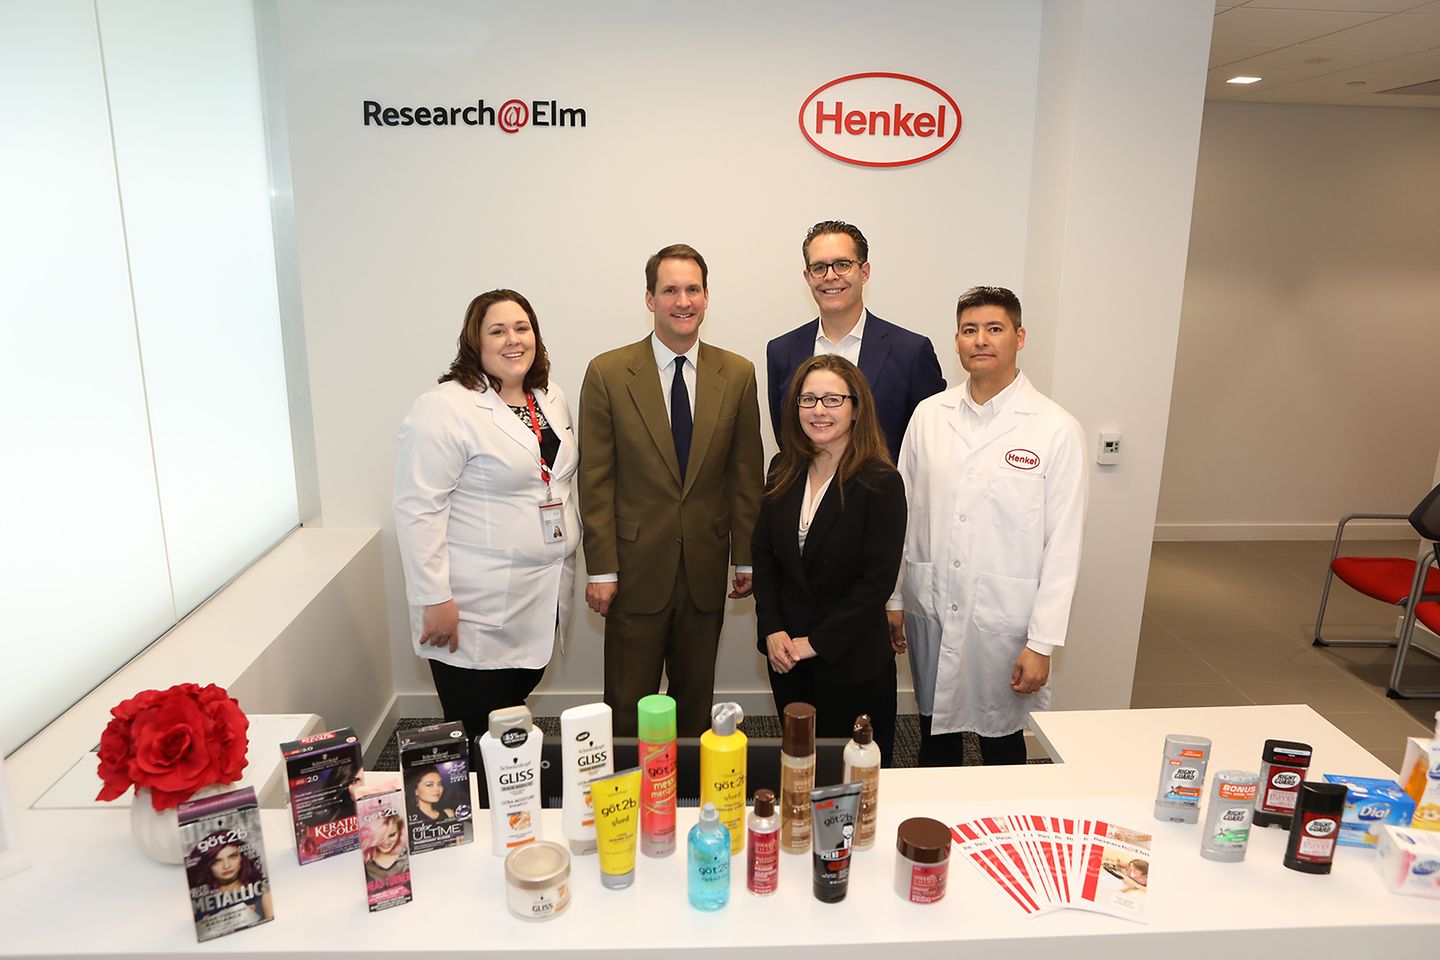 Congressman Jim Himes (second from left) of Connecticut's Fourth District with (from left) Eleanor Harding, Principal Scientist; Martina Spinatsch, VP R&D NA; Brian Heindl, Director of Public Affairs/Government Relations; and Michael Mathiesen, Manager R&D NA.